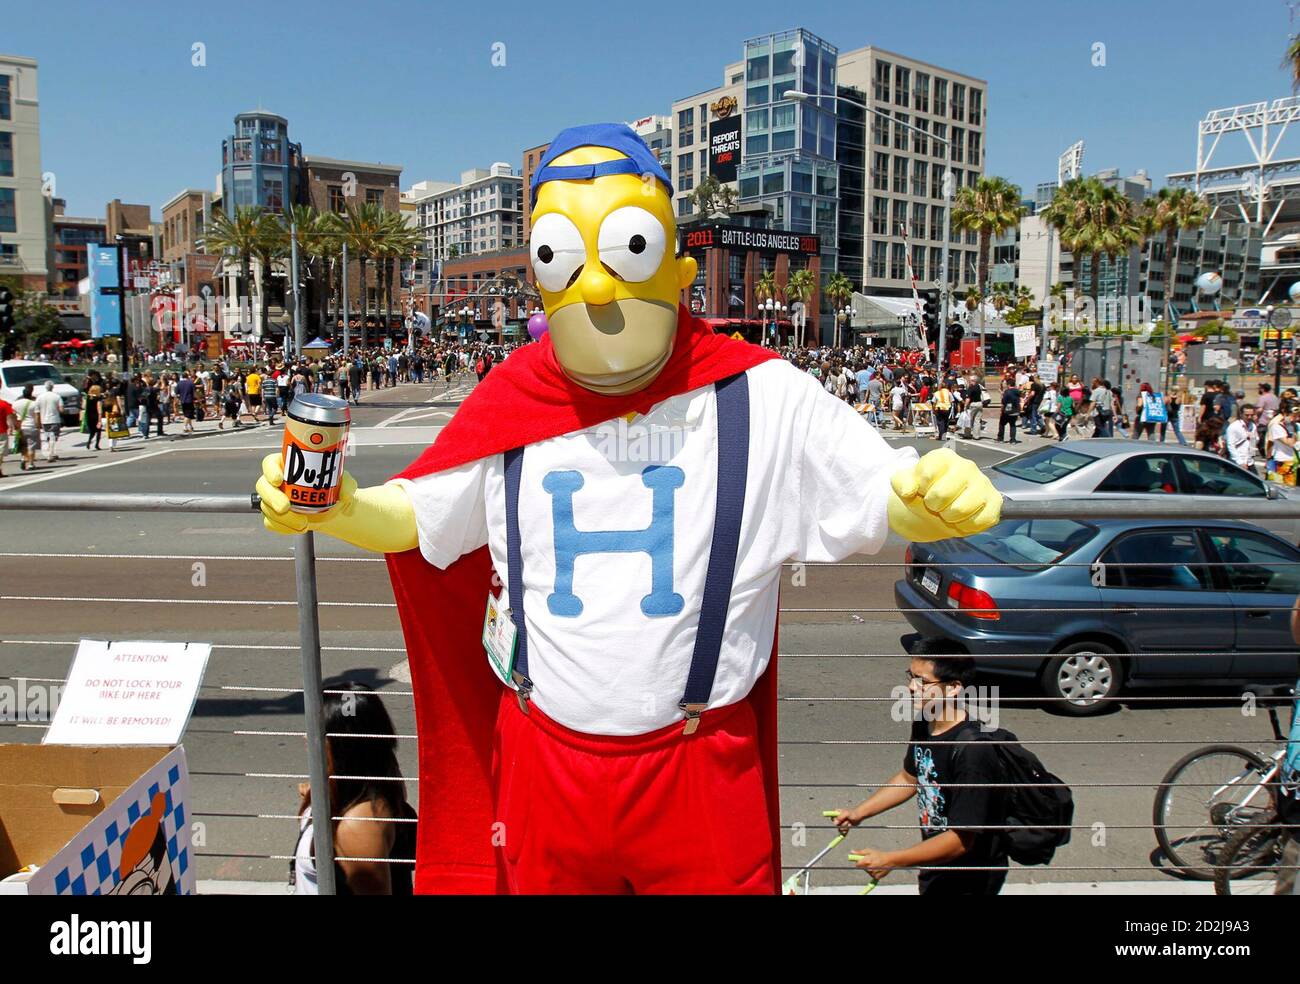 An attendee arrives dressed as Homer Simpson, from the television show 'The Simpsons' during the third day of the pop culture convention Comic Con in San Diego, California July 24, 2010.    REUTERS/Mike Blake  (UNITED STATES - Tags: ENTERTAINMENT) Stock Photo